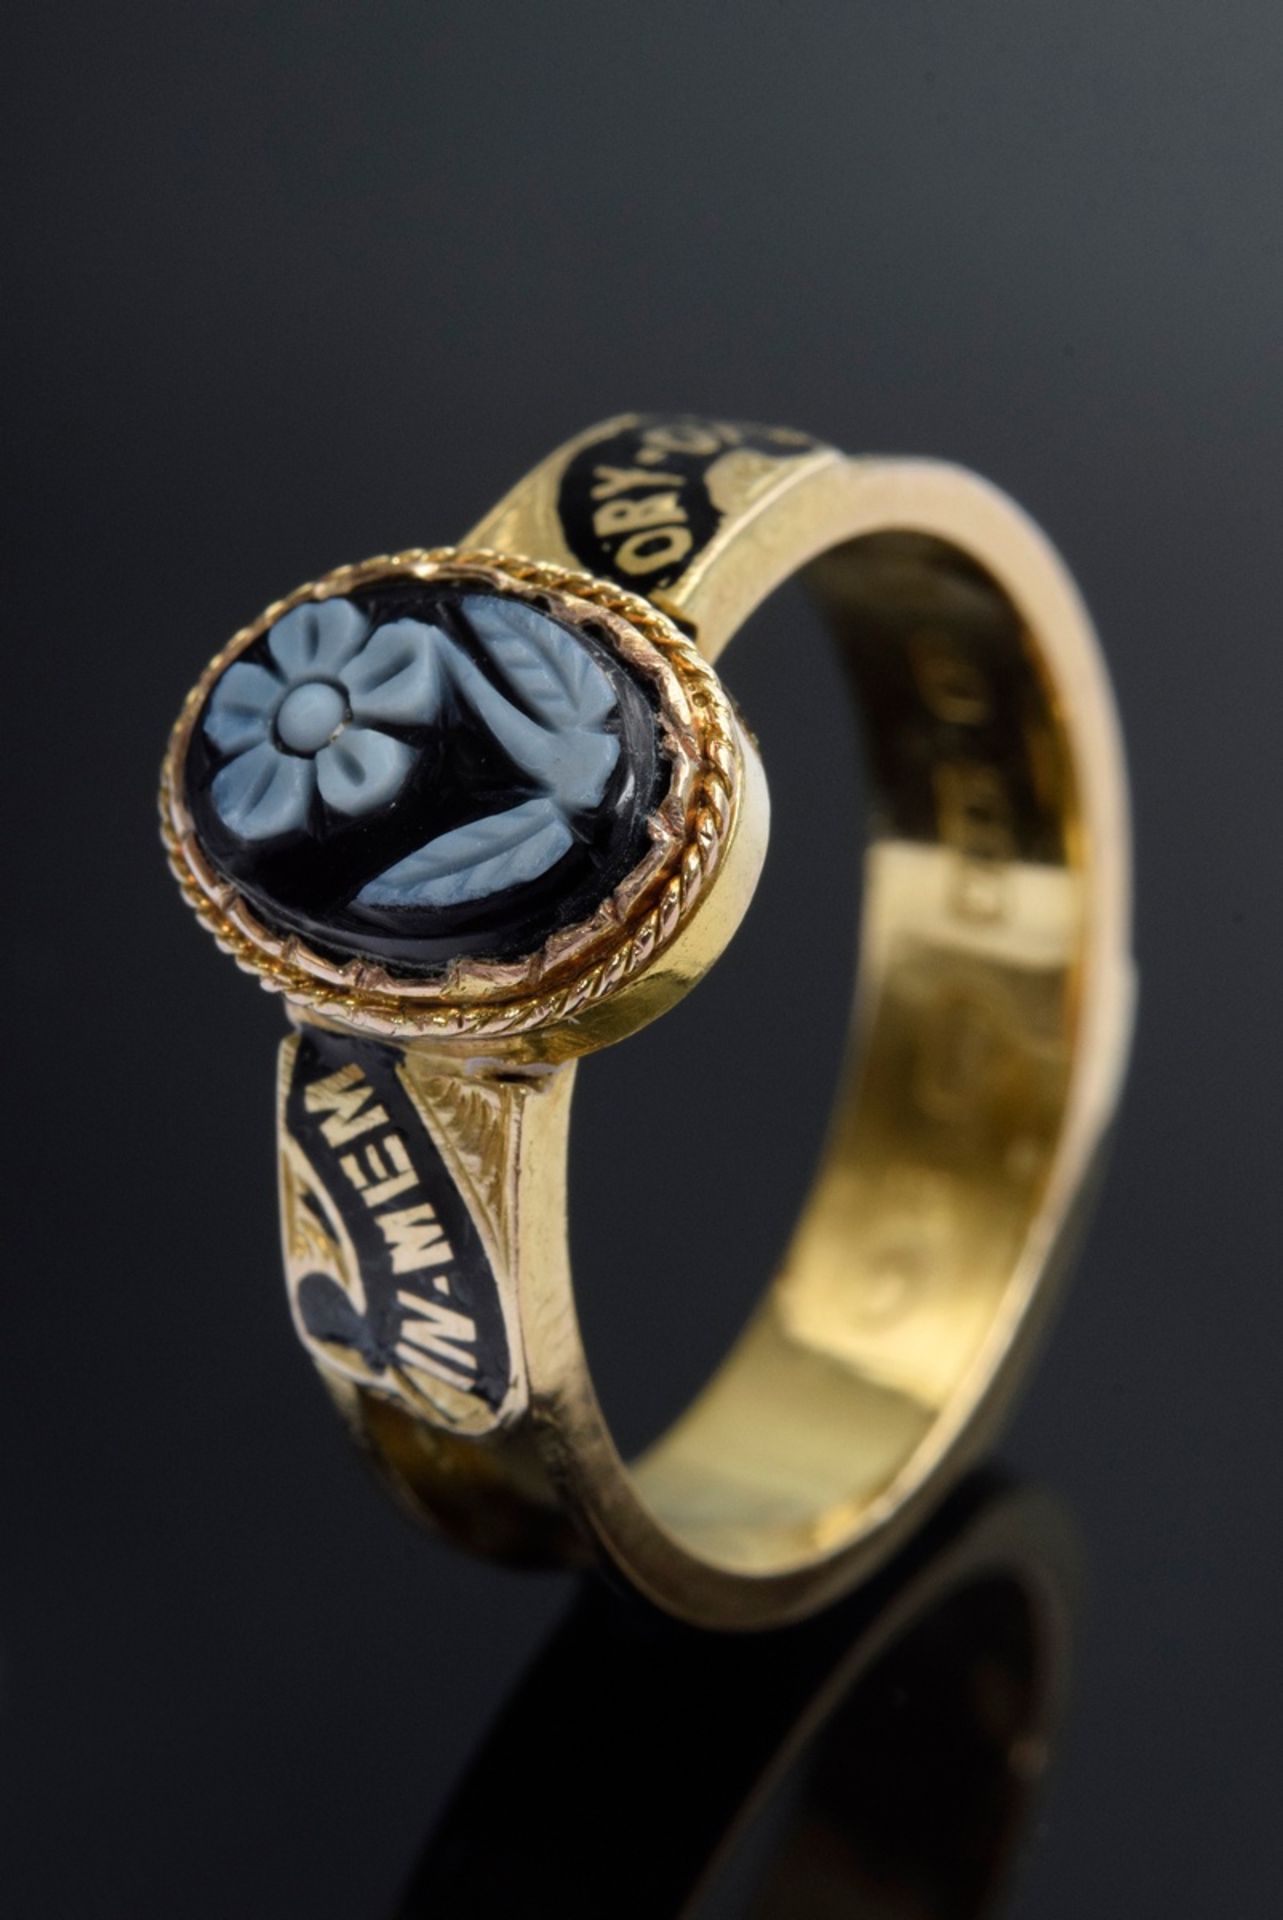 English yellow gold 625 commemorative ring with agate "blossom" and inscription "IN MEMORY OF MOTHE